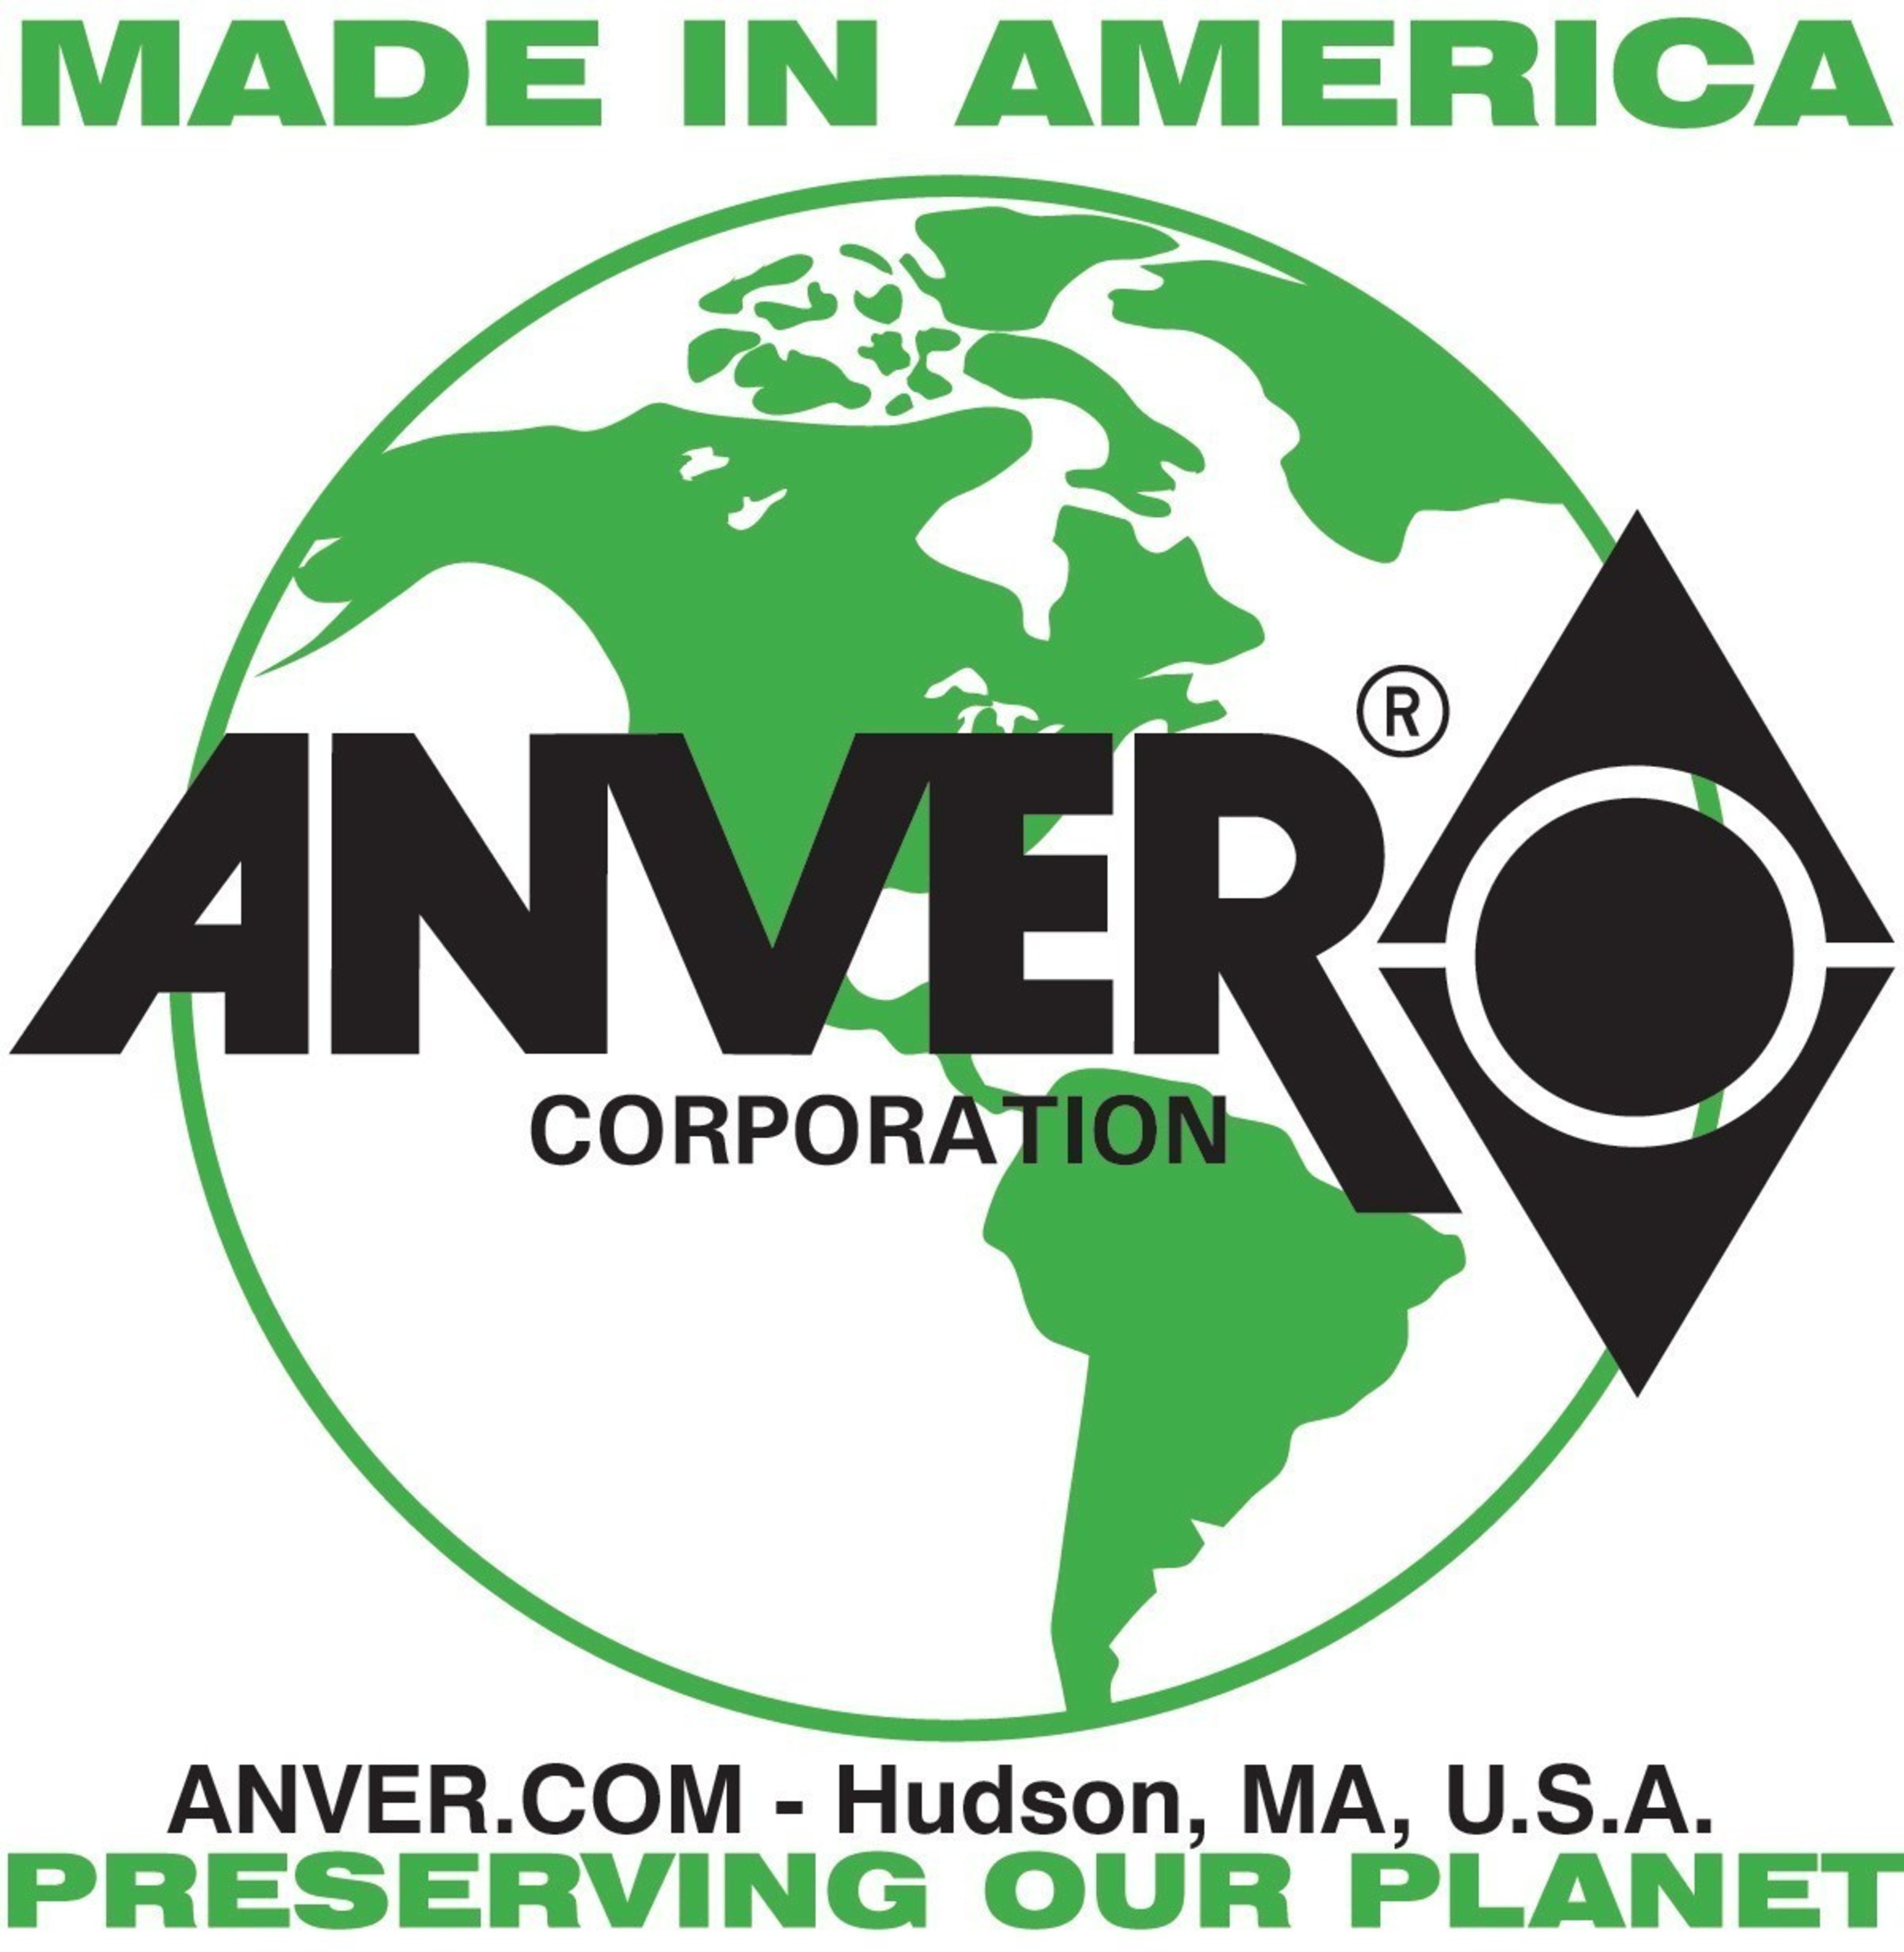 ANVER is joining the ranks of other worldwide companies to help save natural resources